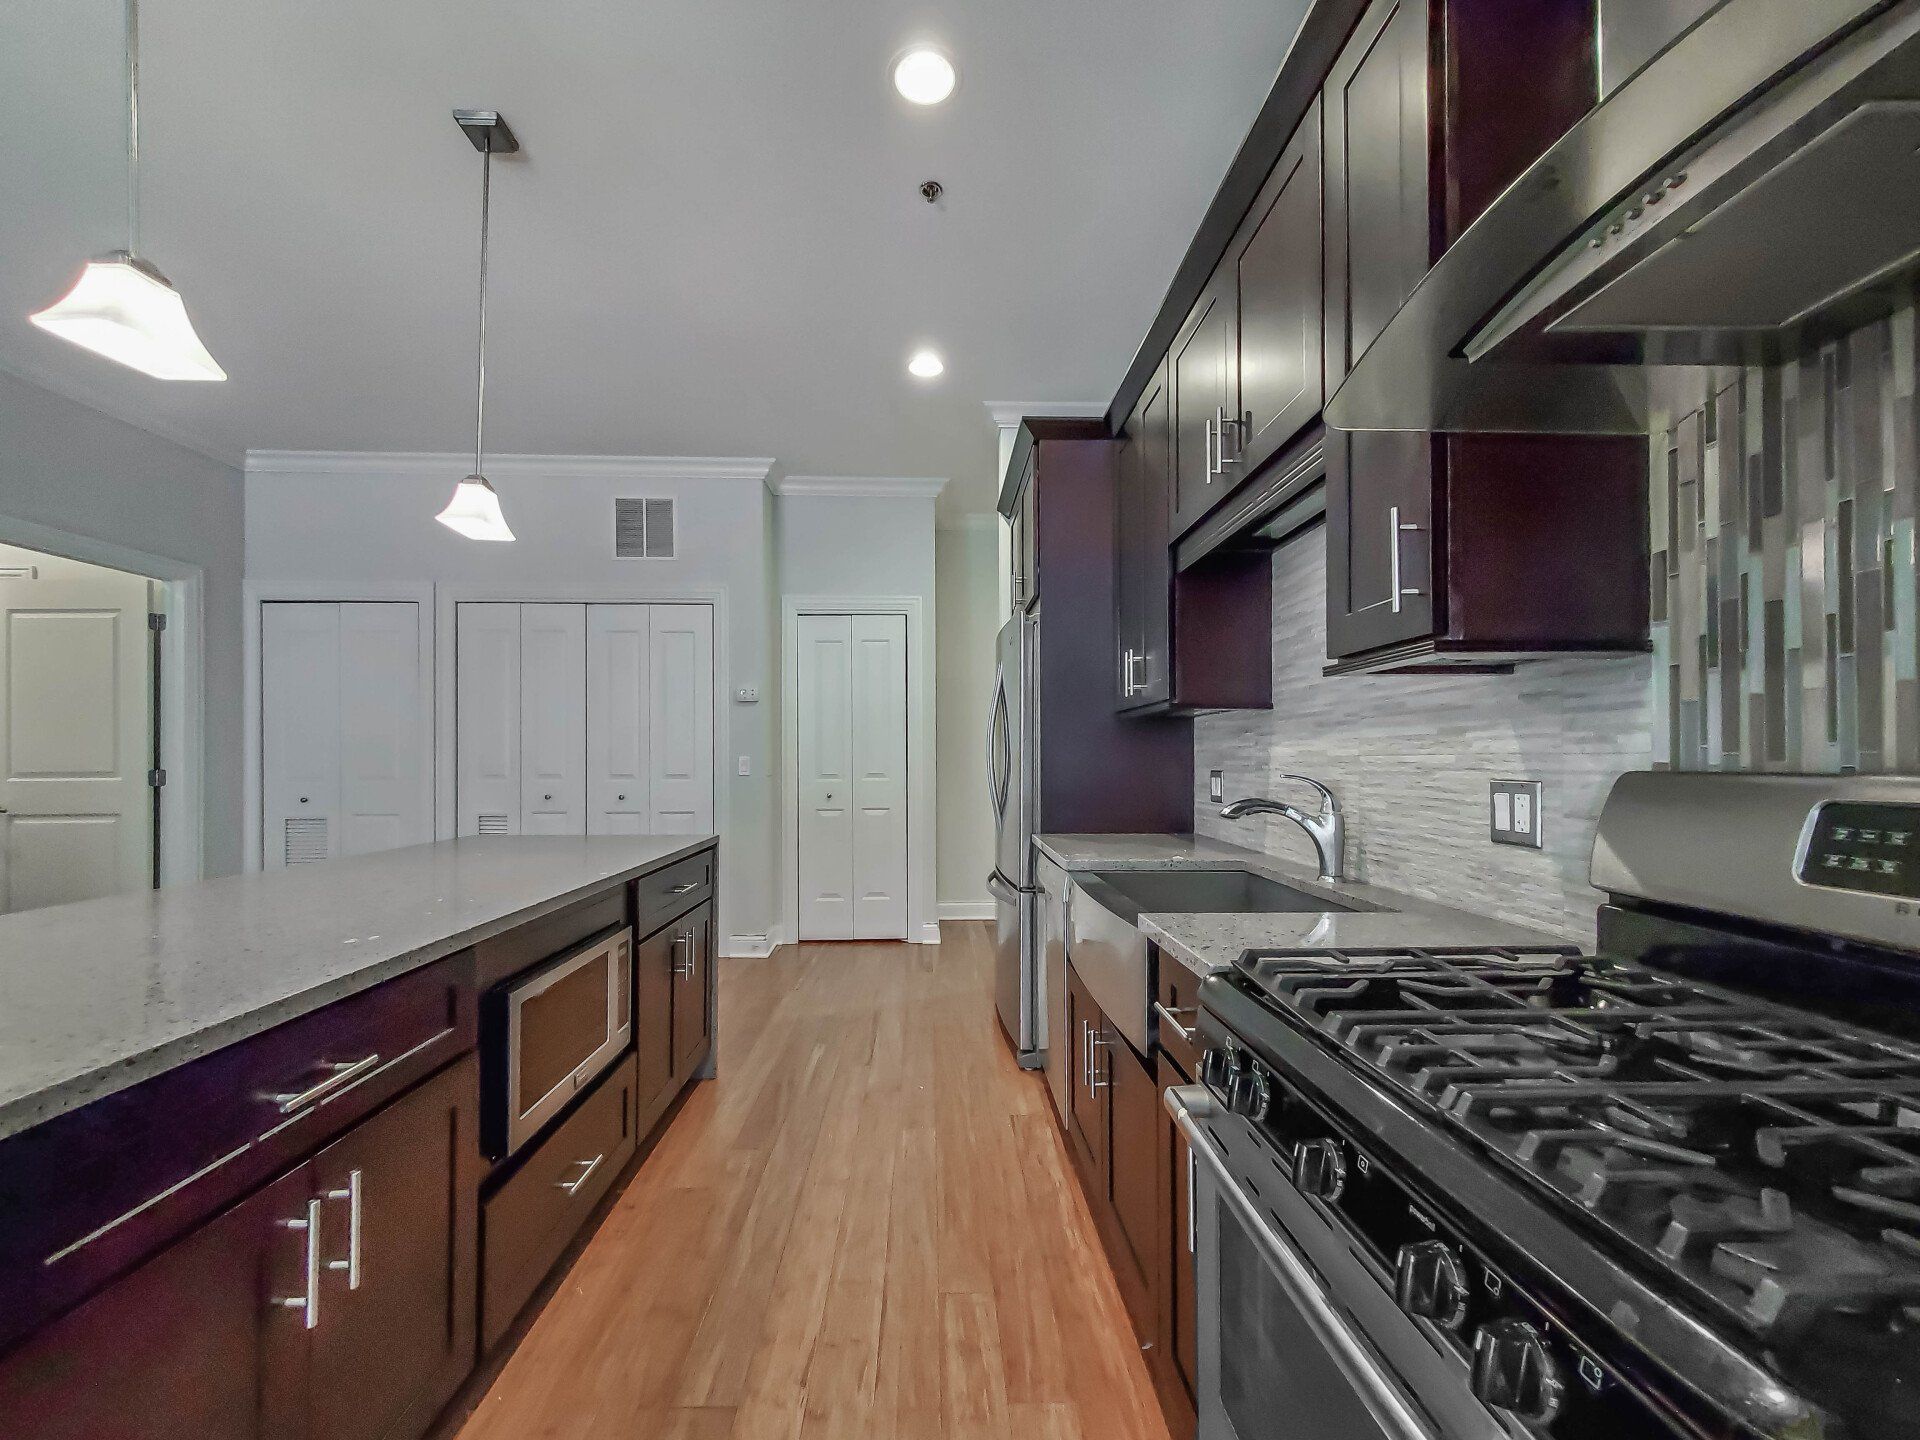 A kitchen with stainless steel appliances and wooden cabinets at Reside on Jackson.